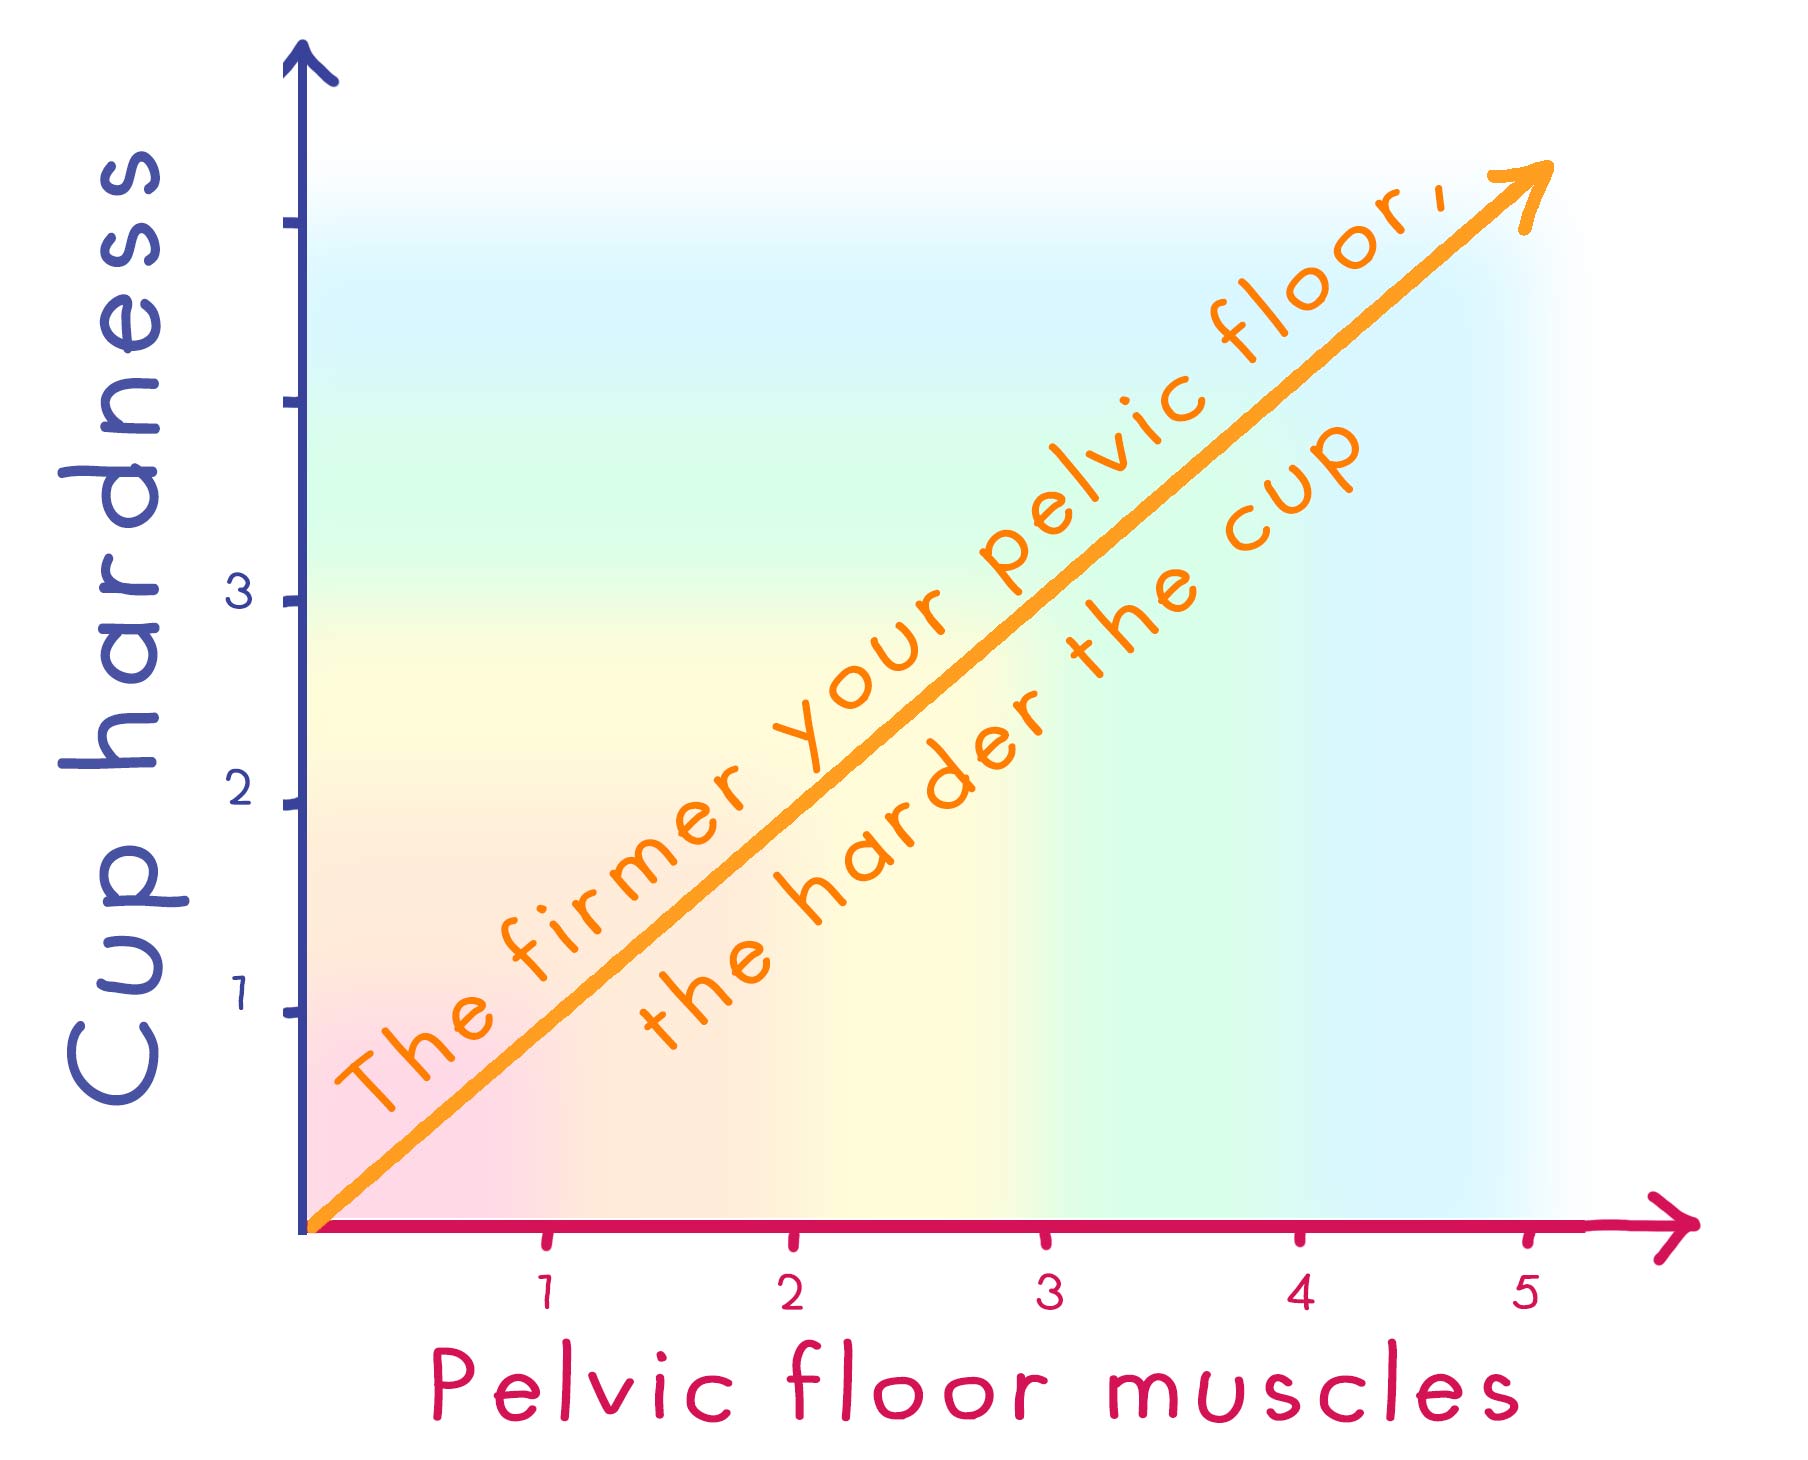 Cup hardness und Pelvic floor muscles, the firmer your pelvic floor, the harder the cup should be